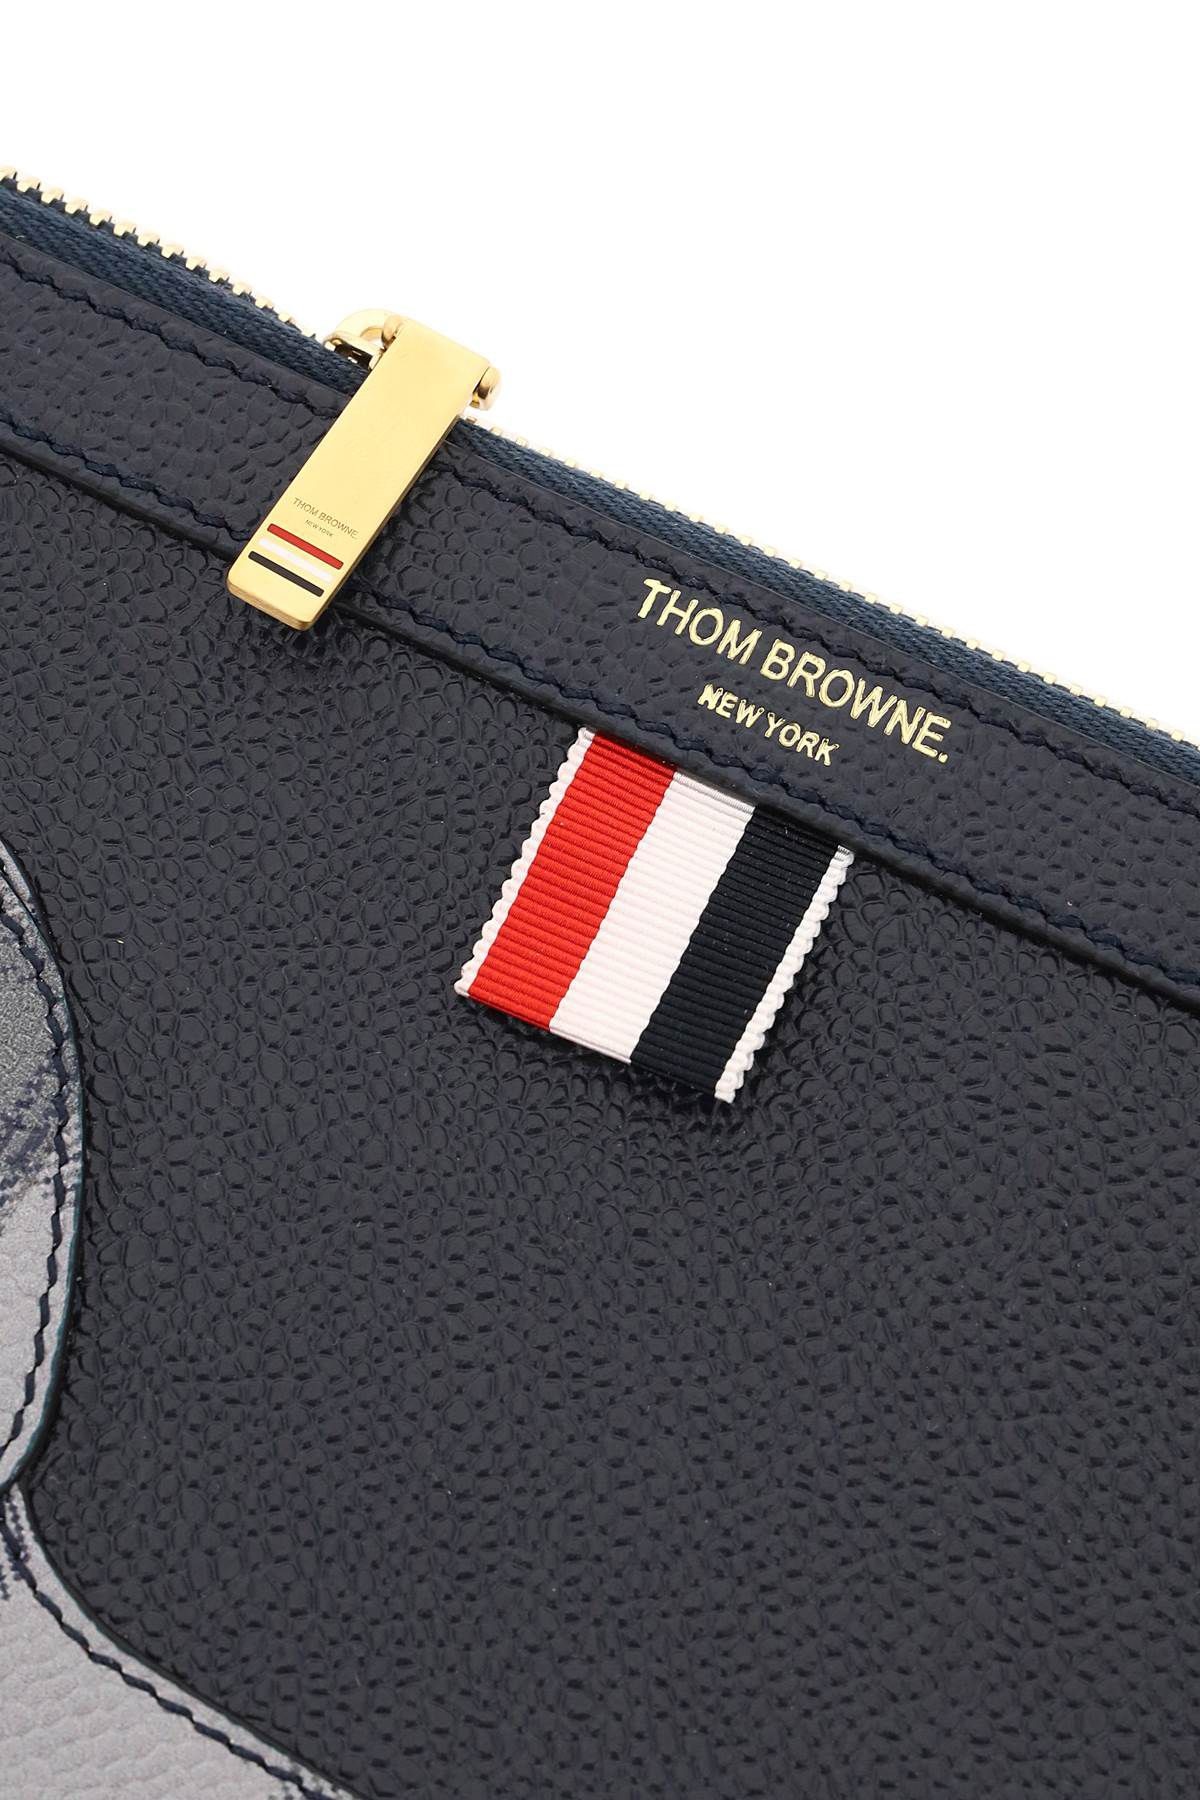 THOM BROWNE GRAIN LEATHER SMALL DOCUMENT HOLDER WITH HECTOR APPLIQUE (RMNOnline.net / RMNOnline Fashion Group)